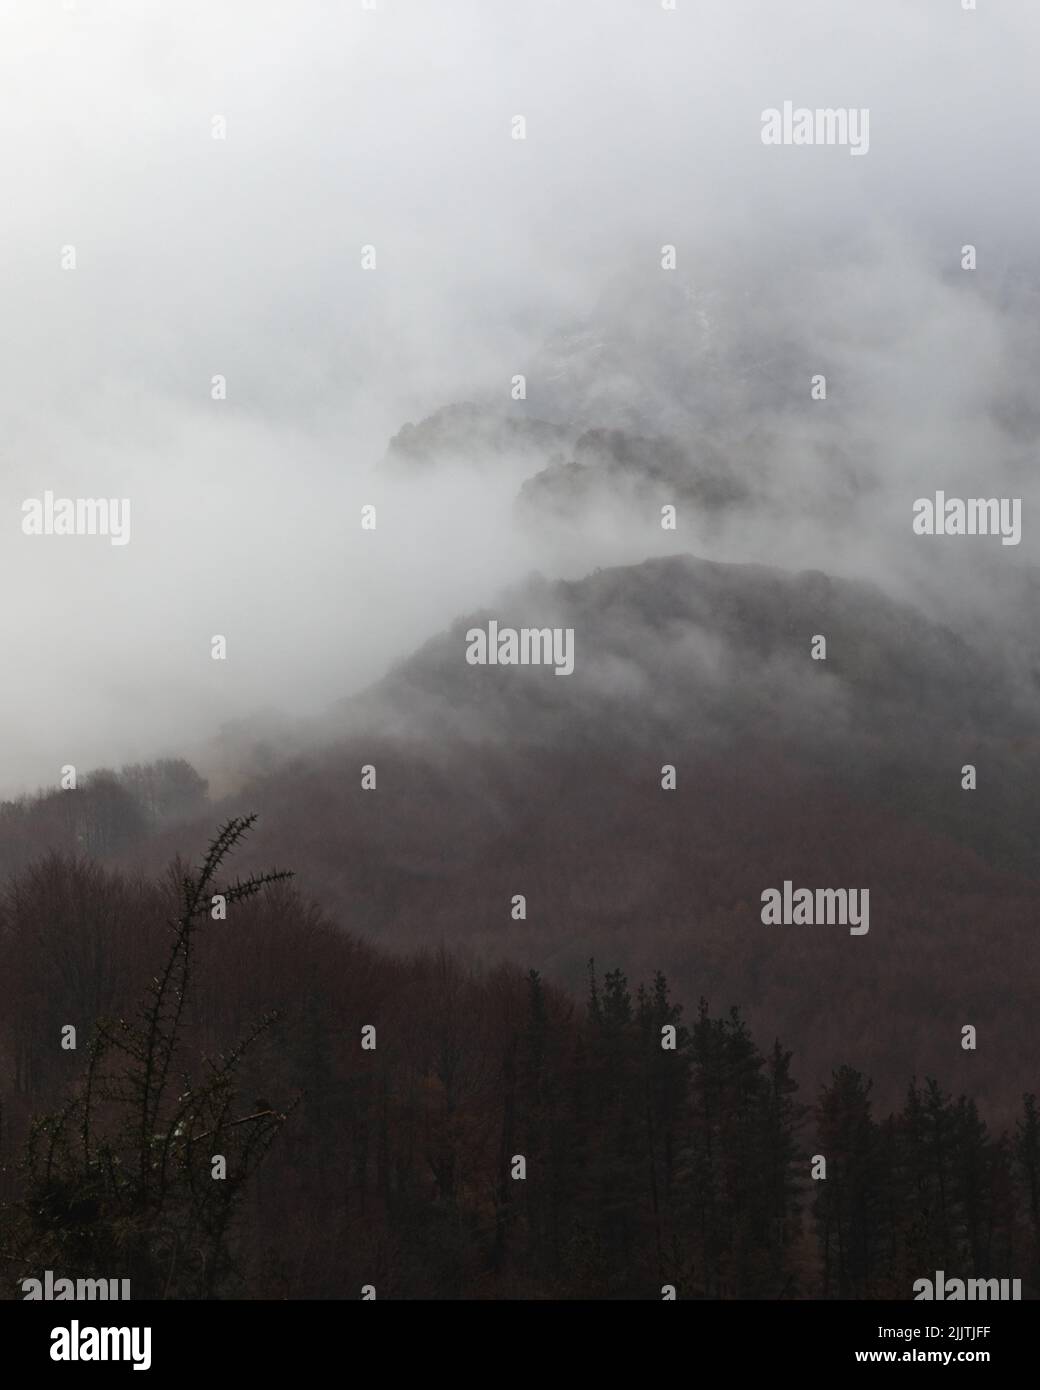 A gray clouds over mountain and trees in a foggy day Stock Photo